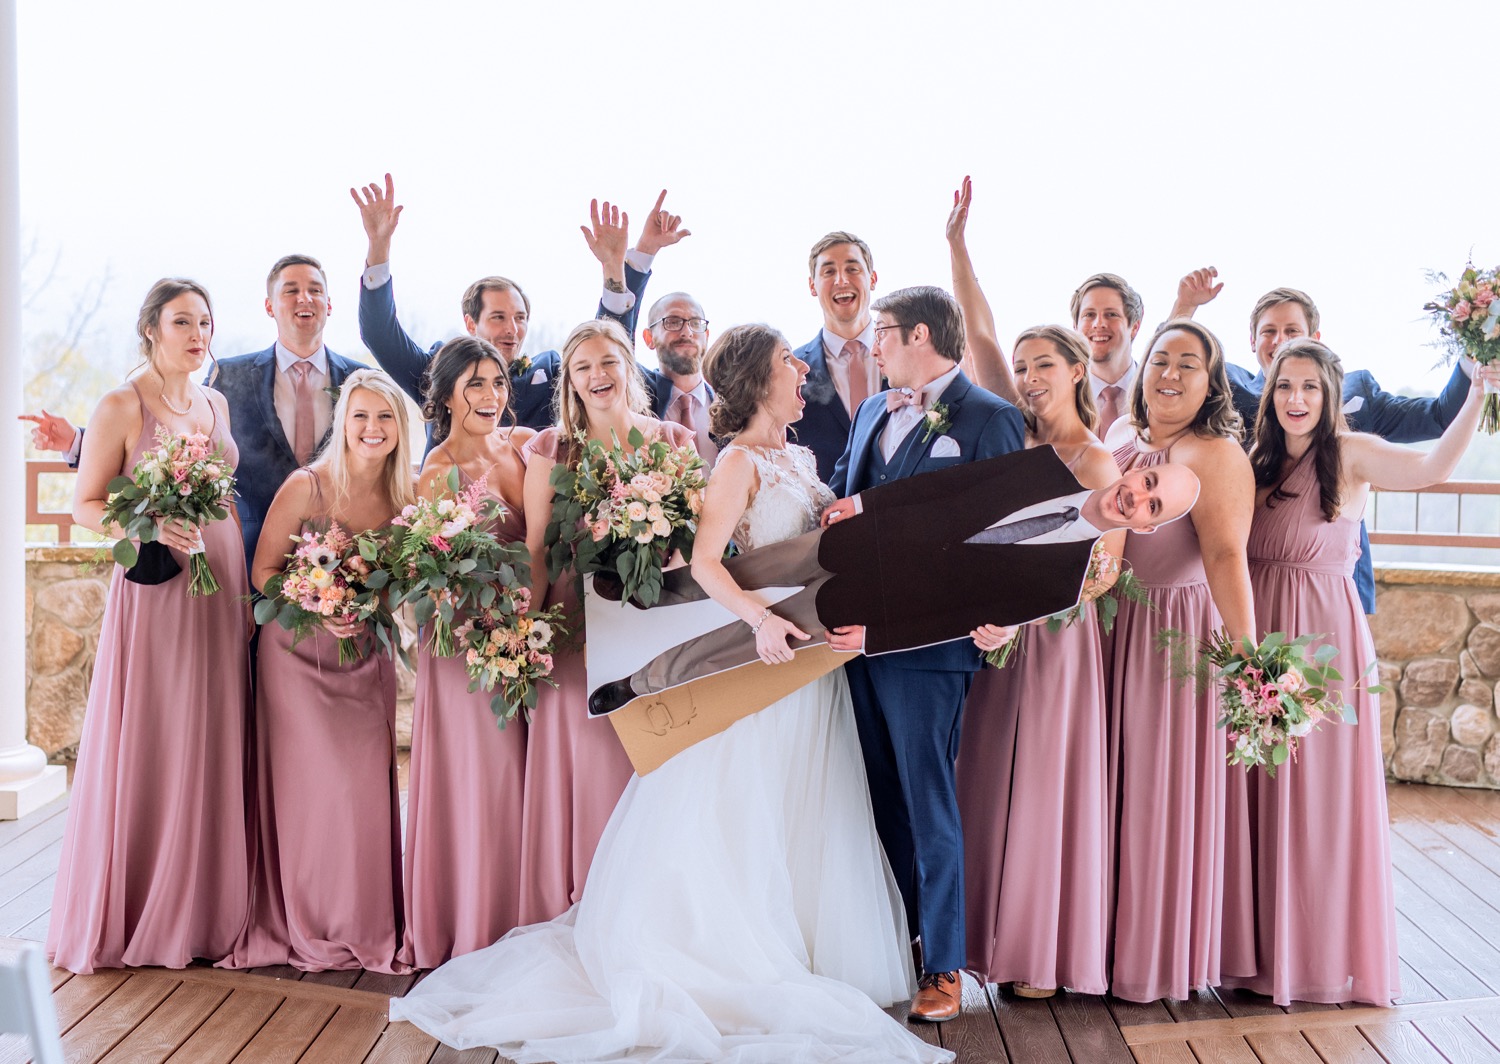 Bride and groom pose with bridal party and cardboard groomsman at Irvine Estate